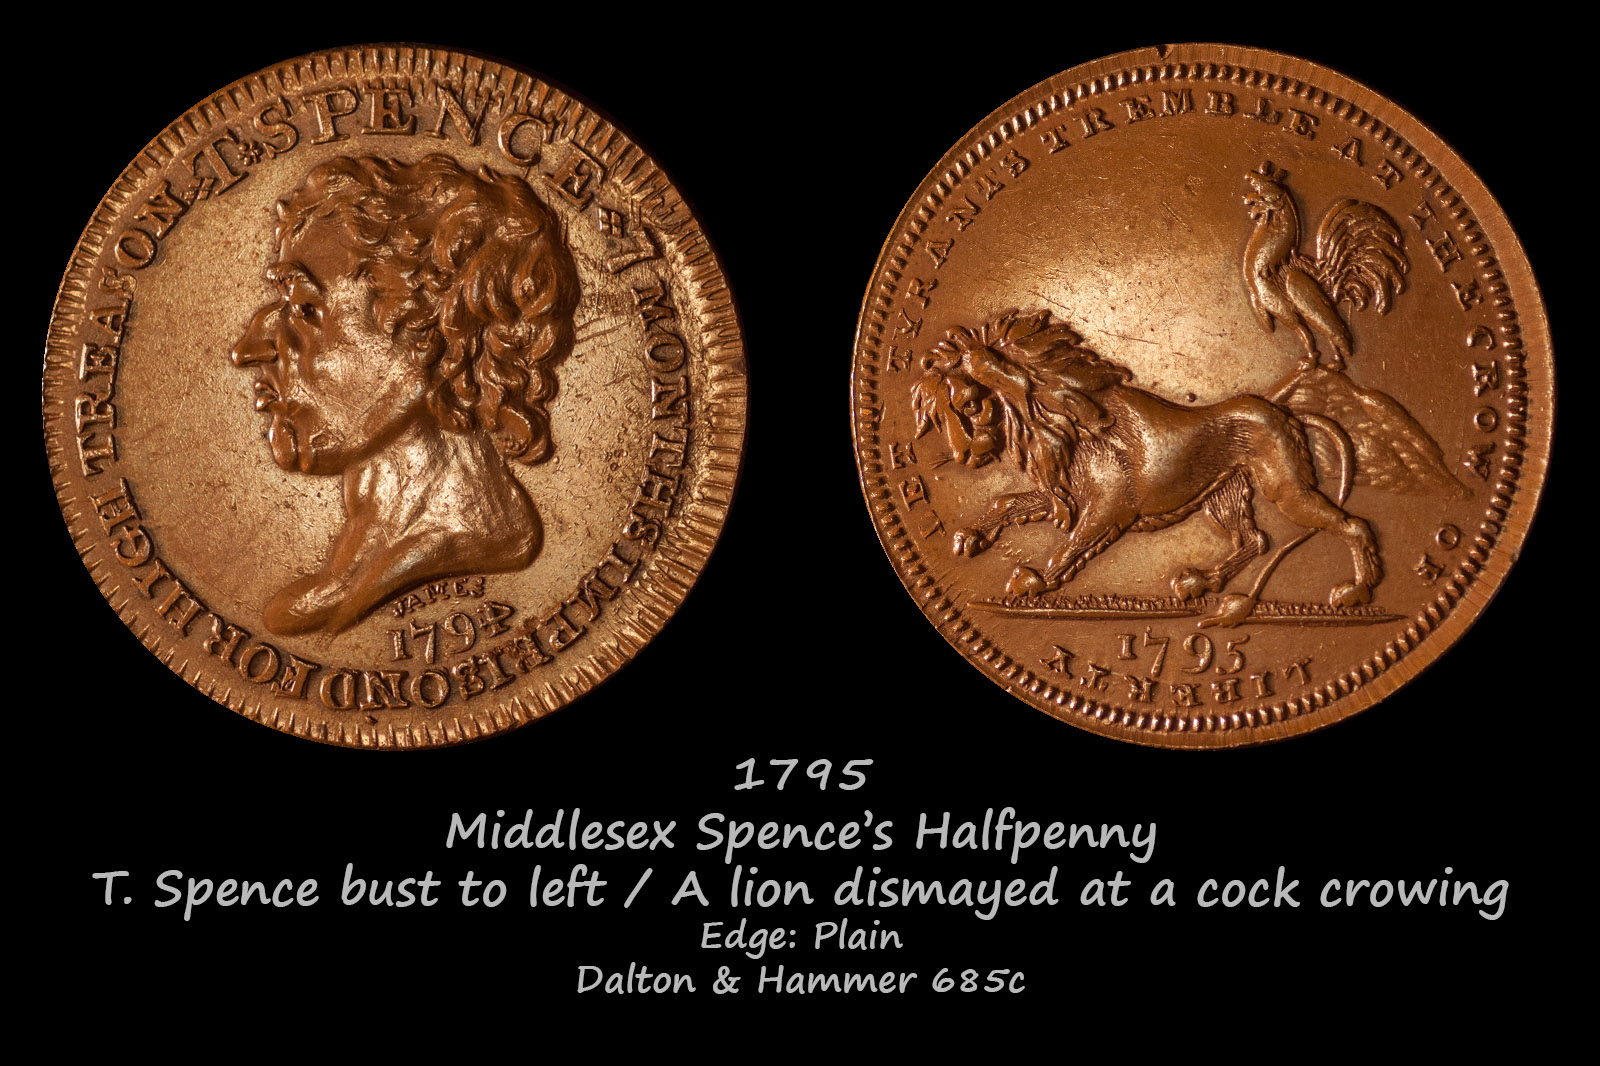 Middlesex Spence's Halfpenny D&H685c